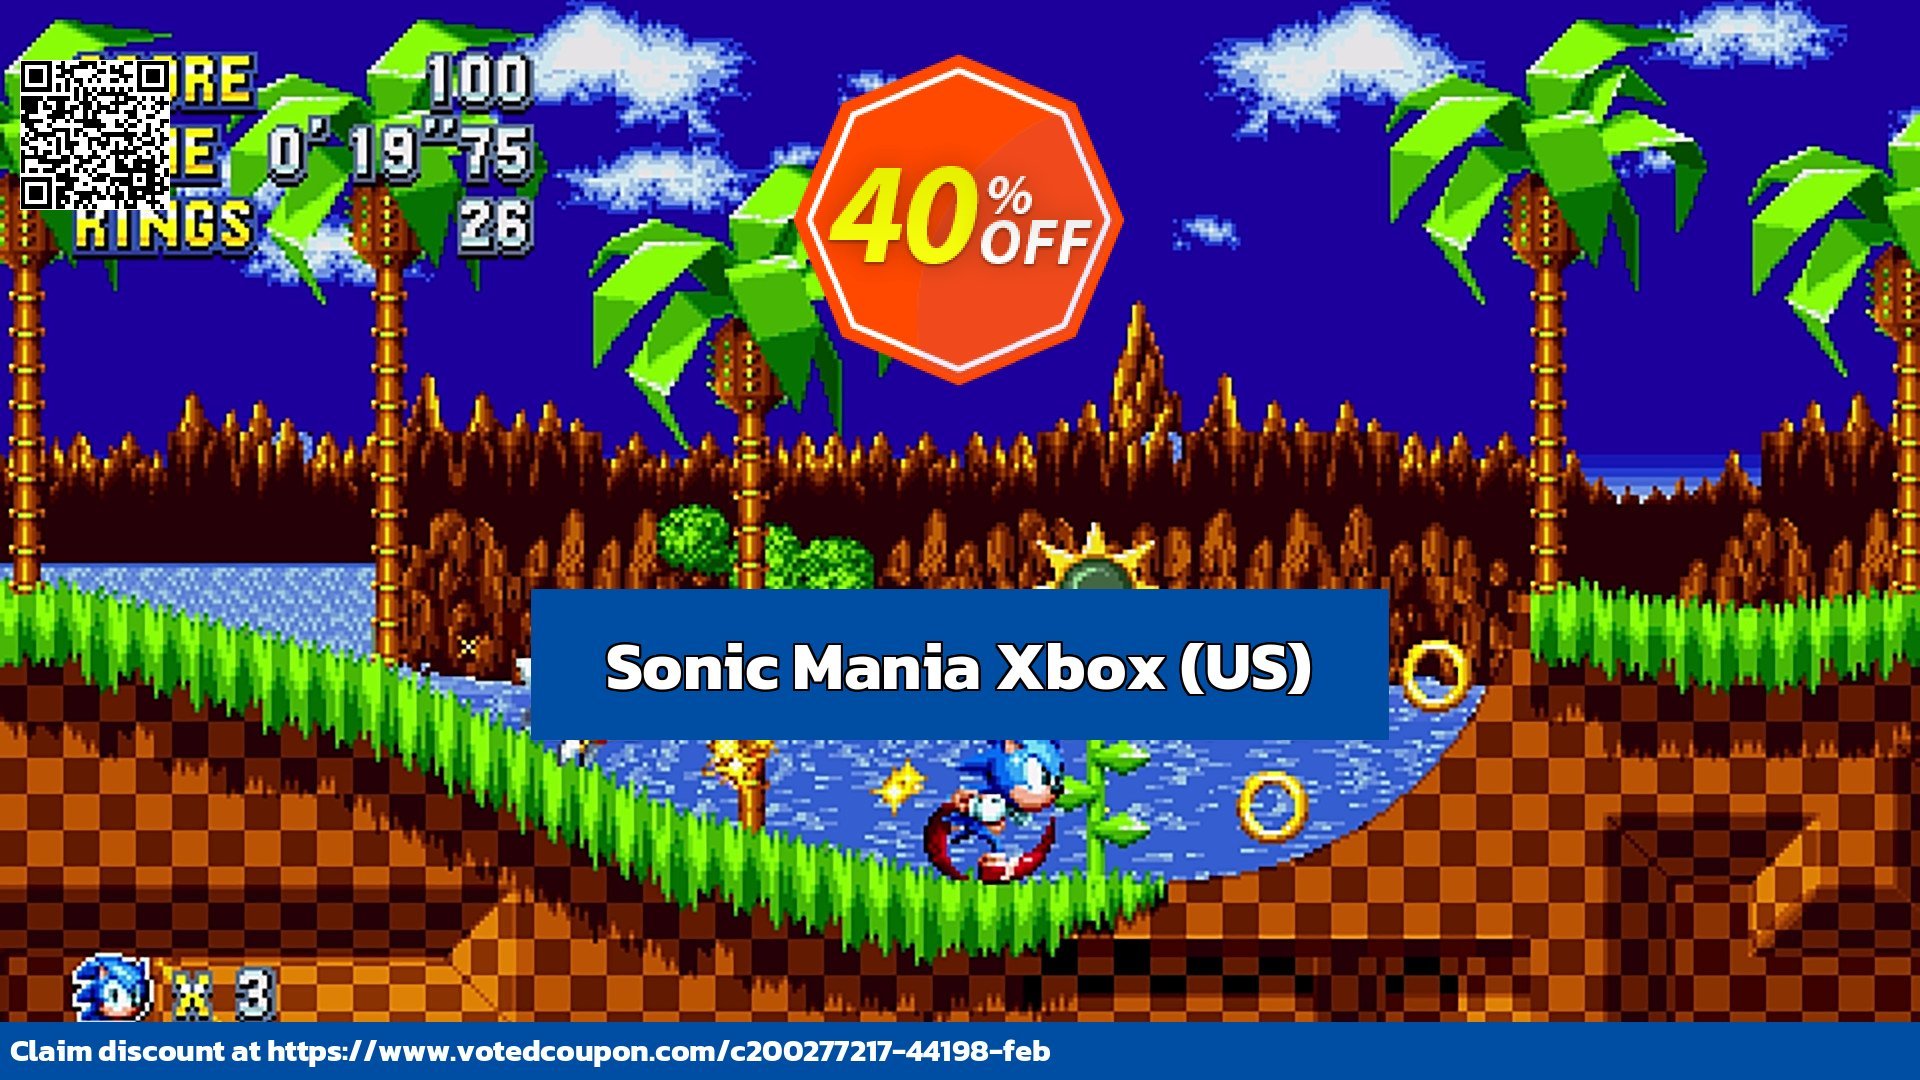 Sonic Mania Xbox, US  voted-on promotion codes